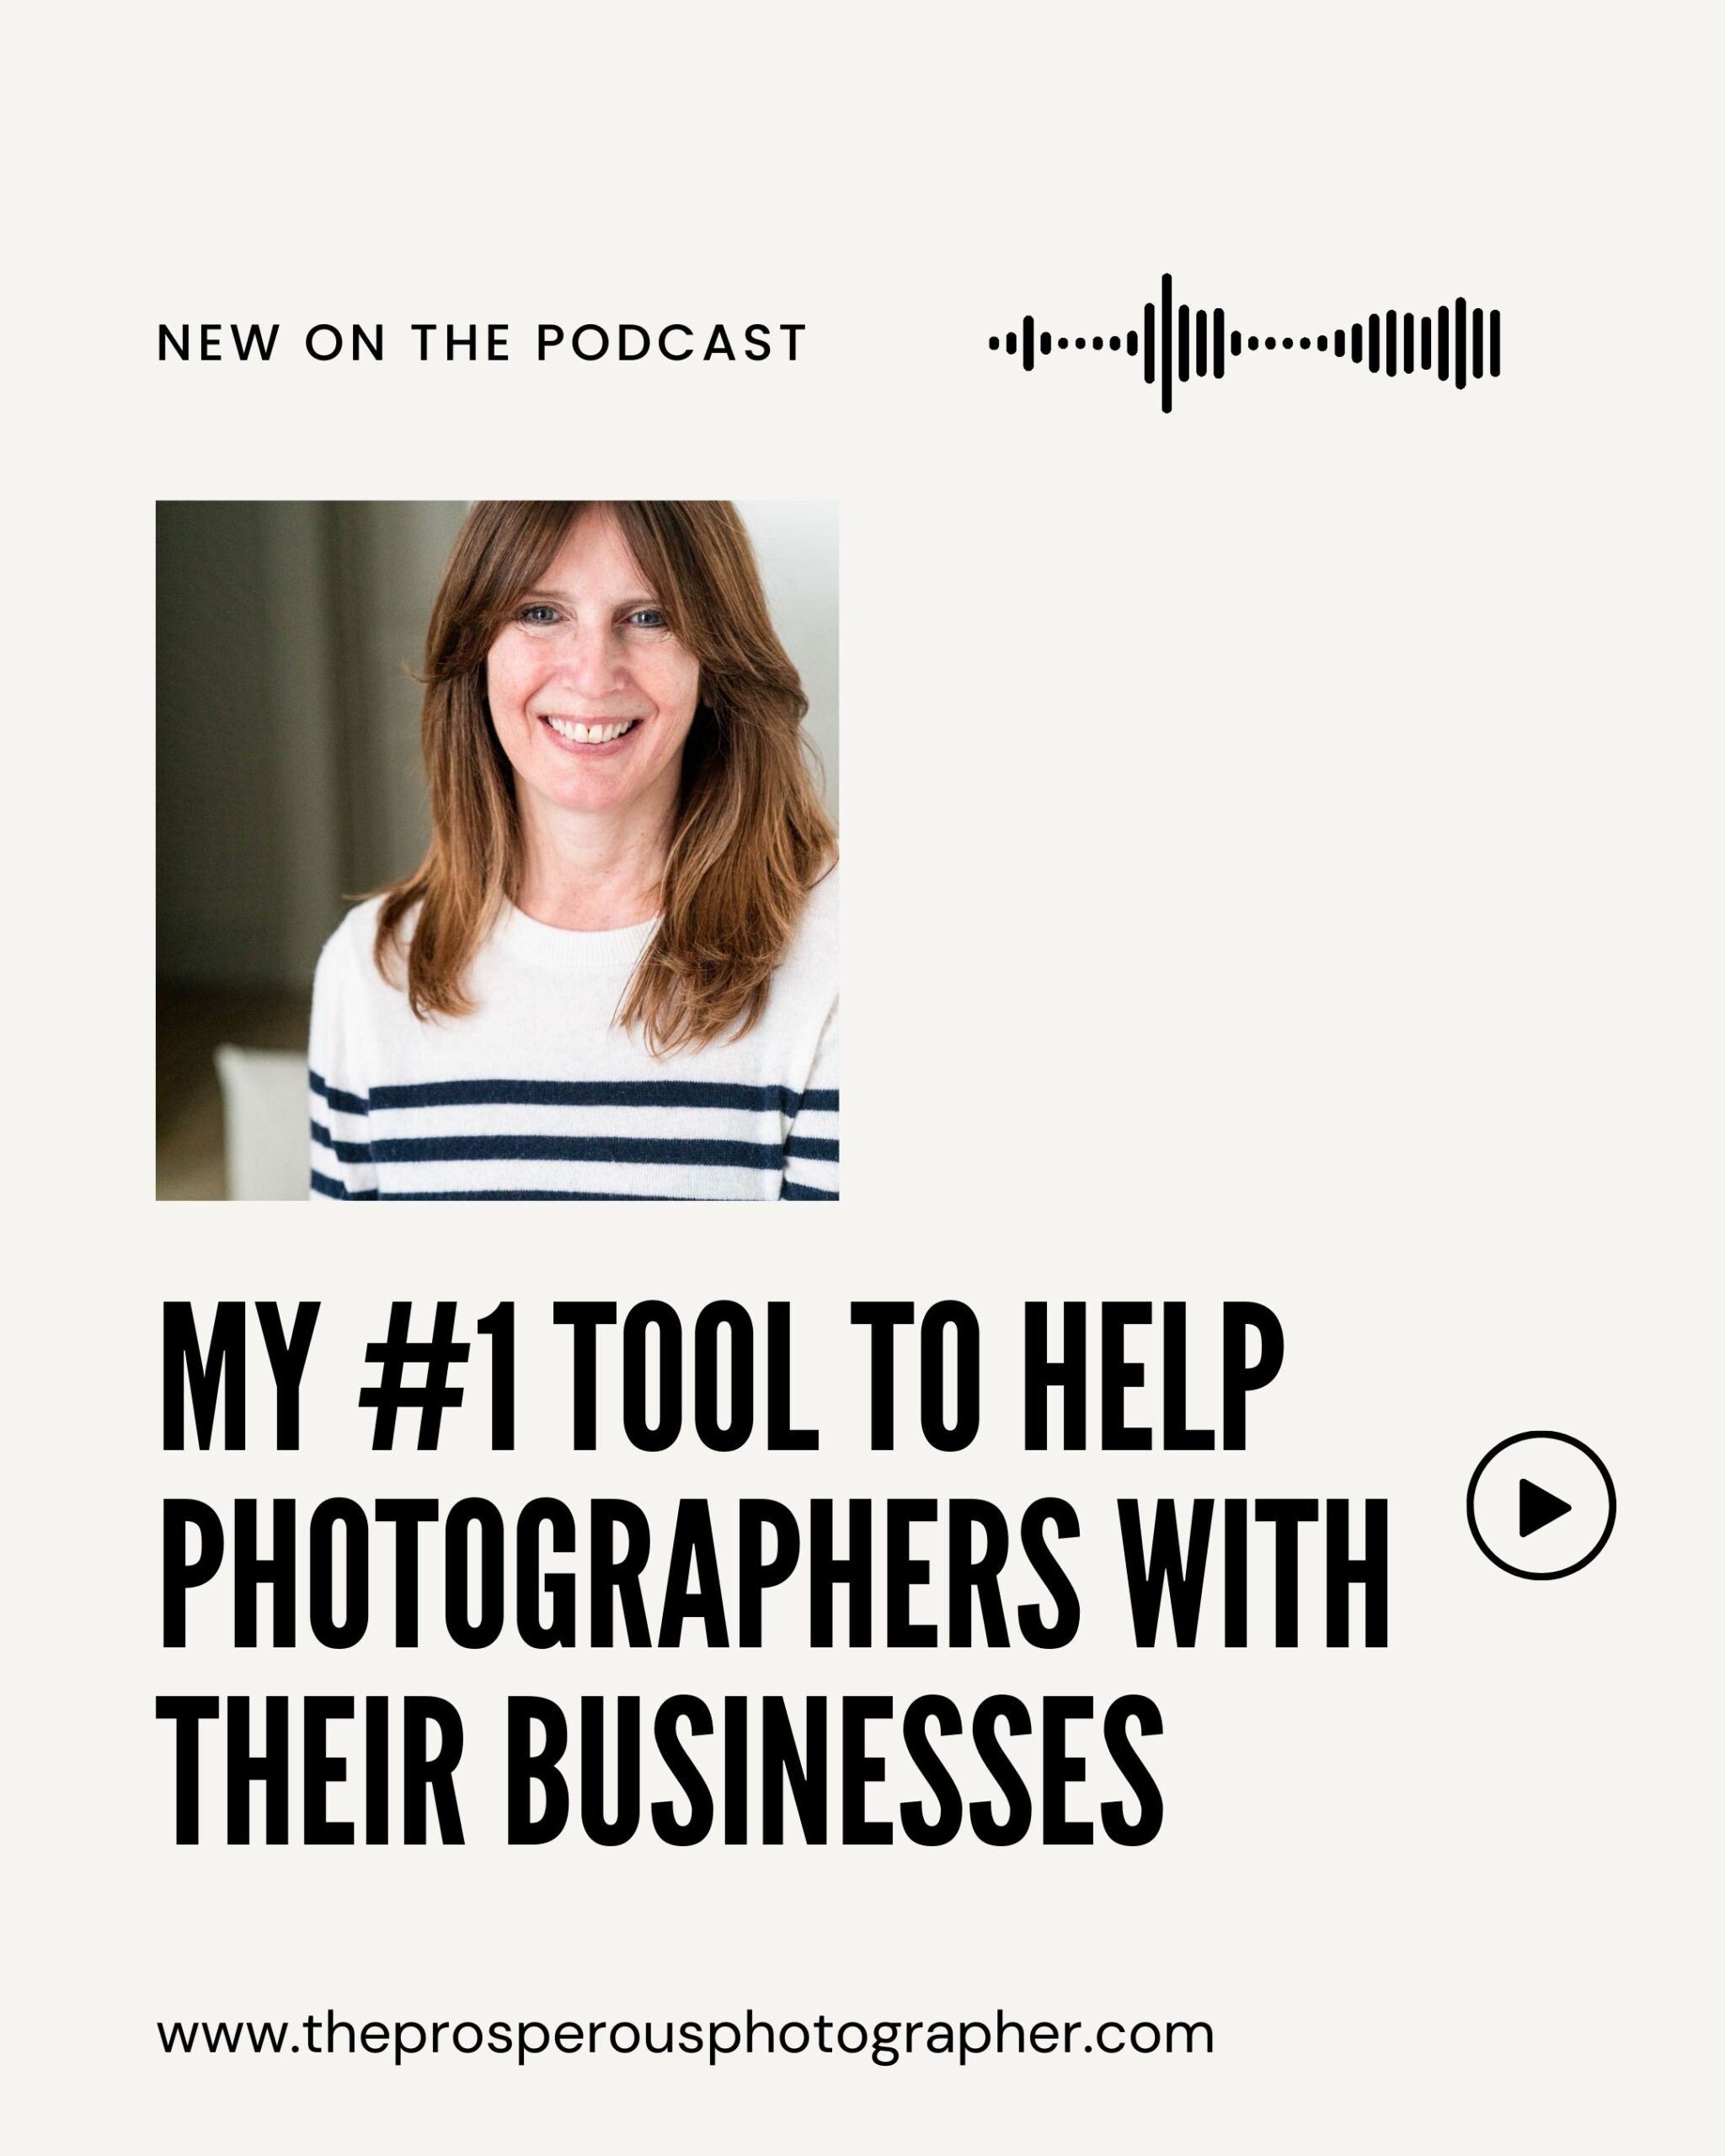 My #1 Tool to Help Photographers with their businesses? Coaching.